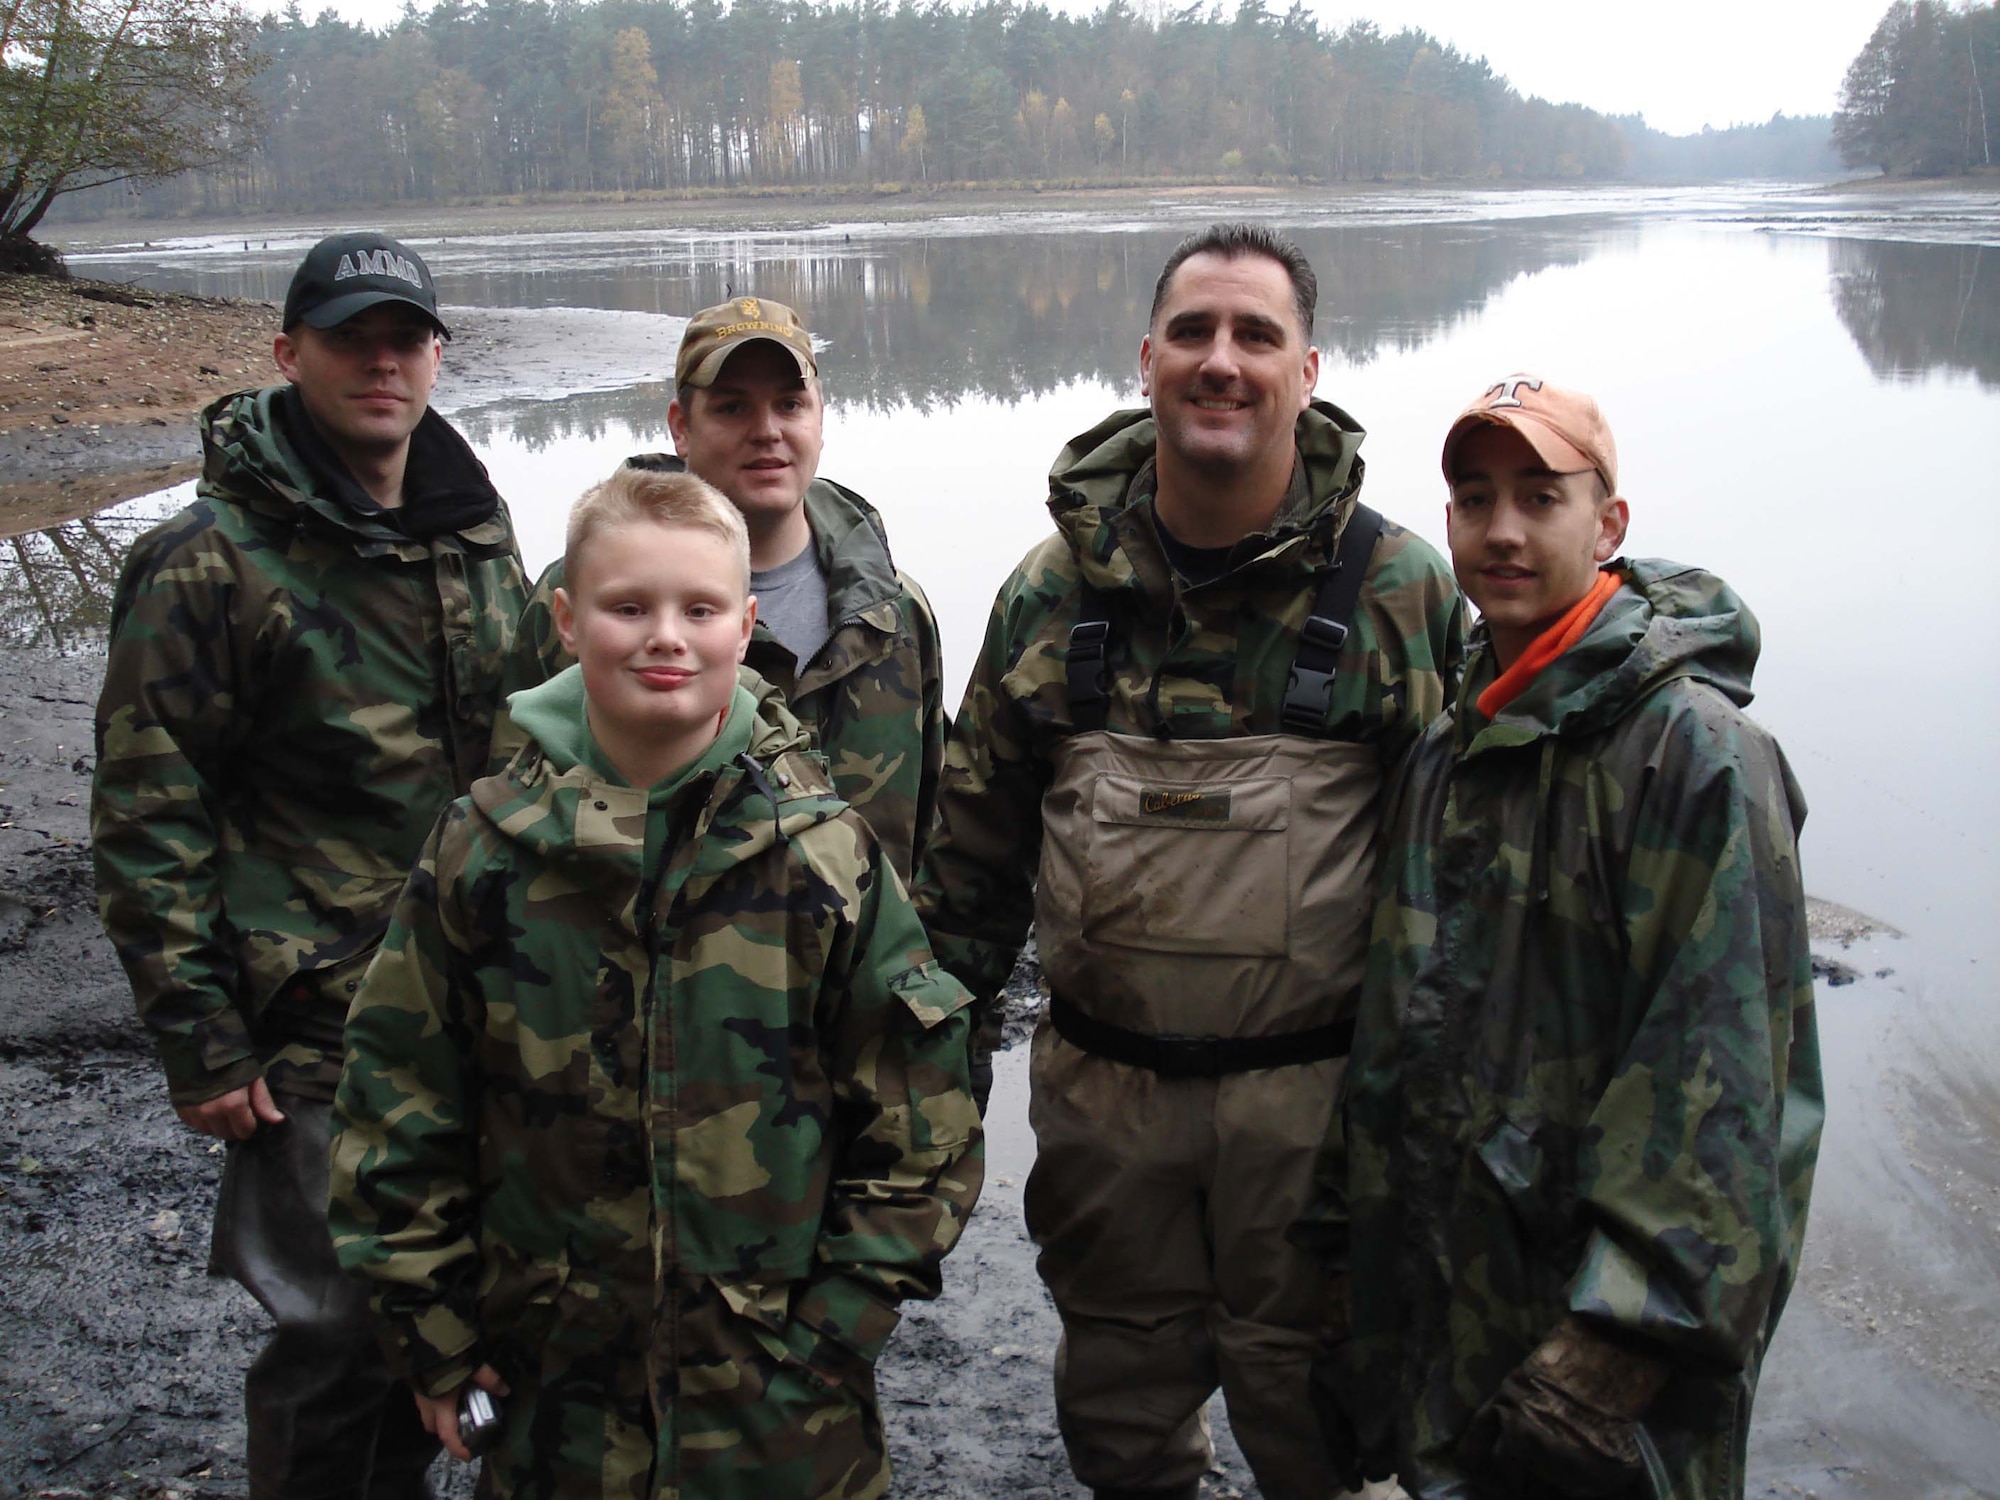 Staff Sgt. David Kieper, Zachary Windorf, Airman 1st Class Jeremy Burney, Master Sgt. Scott Windorf, and Airman 1st Class Jonathan Farmer stand in front of the lake that was drained to evict its large wells catfish. (Courtesy photo)

